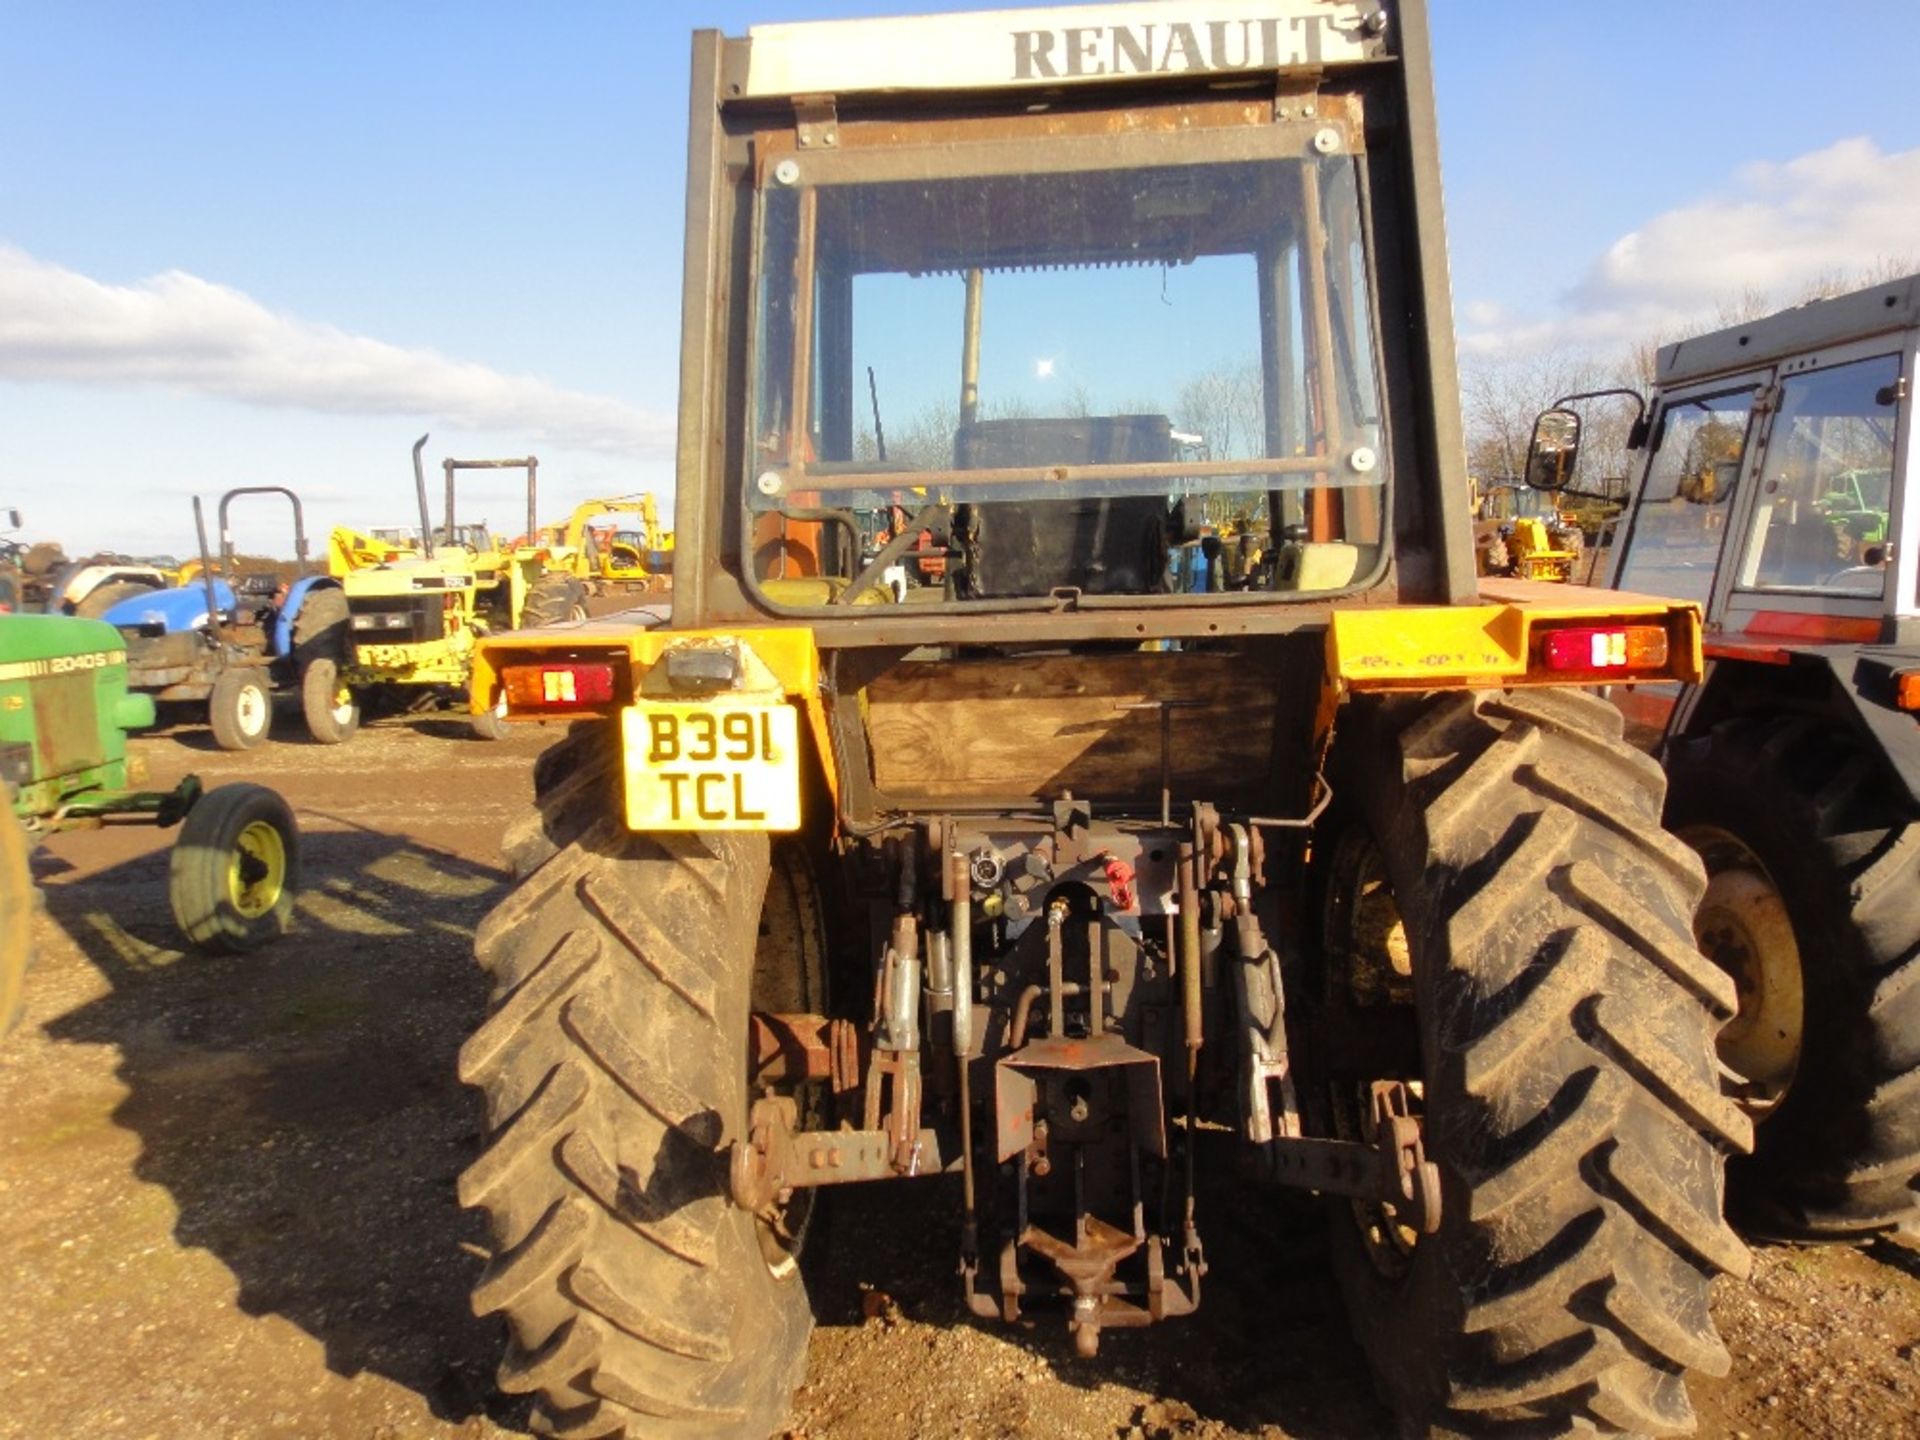 Renault TS75-14 4wd Tractor Reg No. B391 TCL - Image 6 of 13